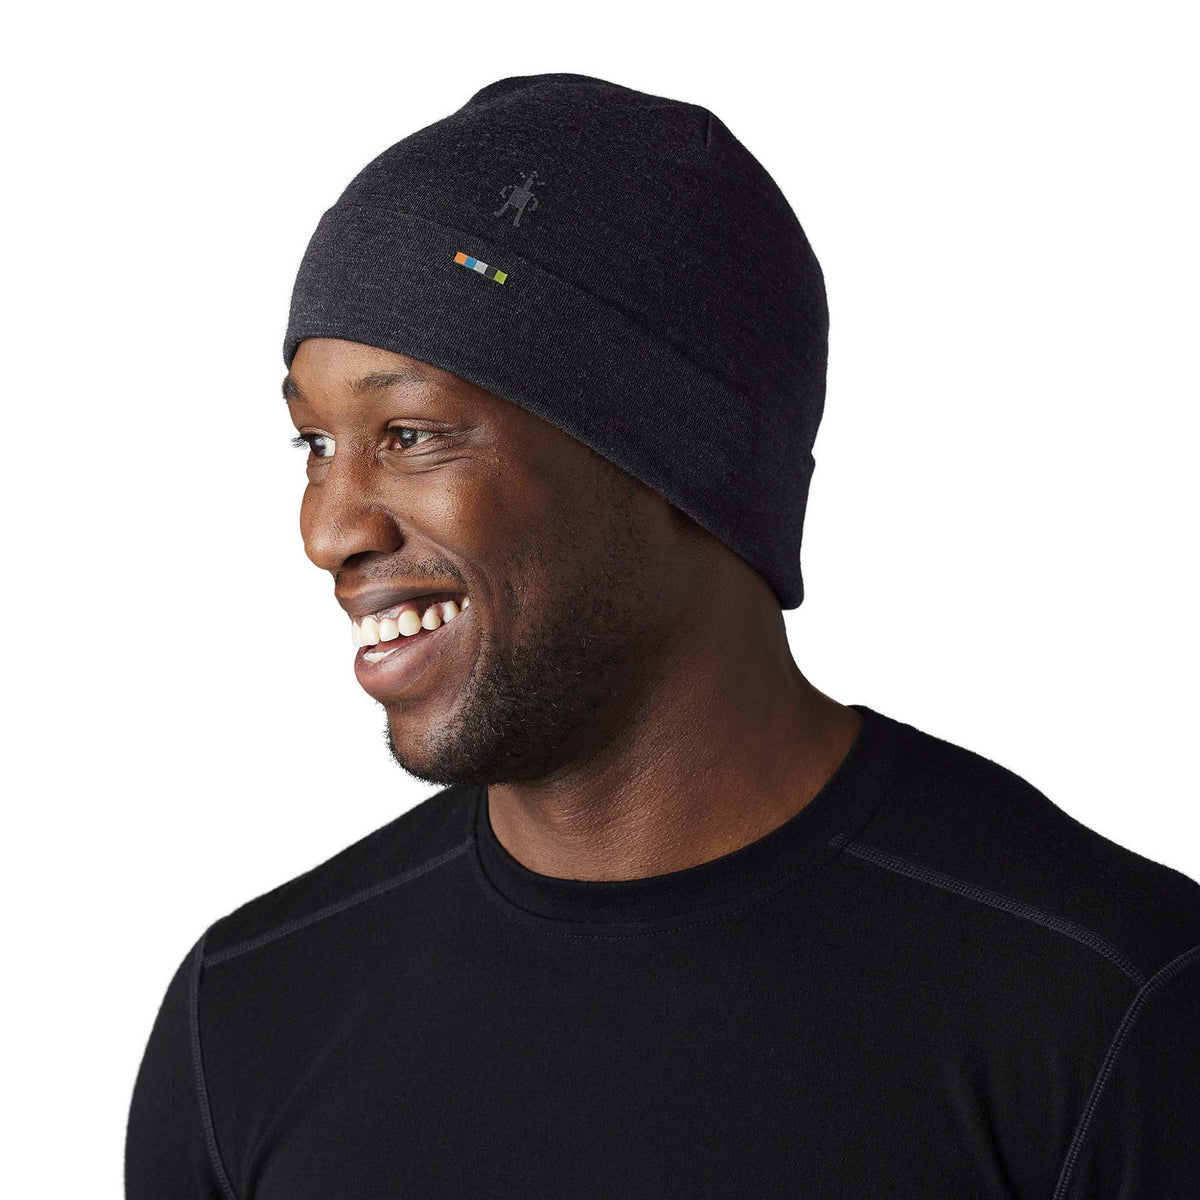 Smartwool Merino 250 Cuffed Beanie tuque unisexe charcoal homme